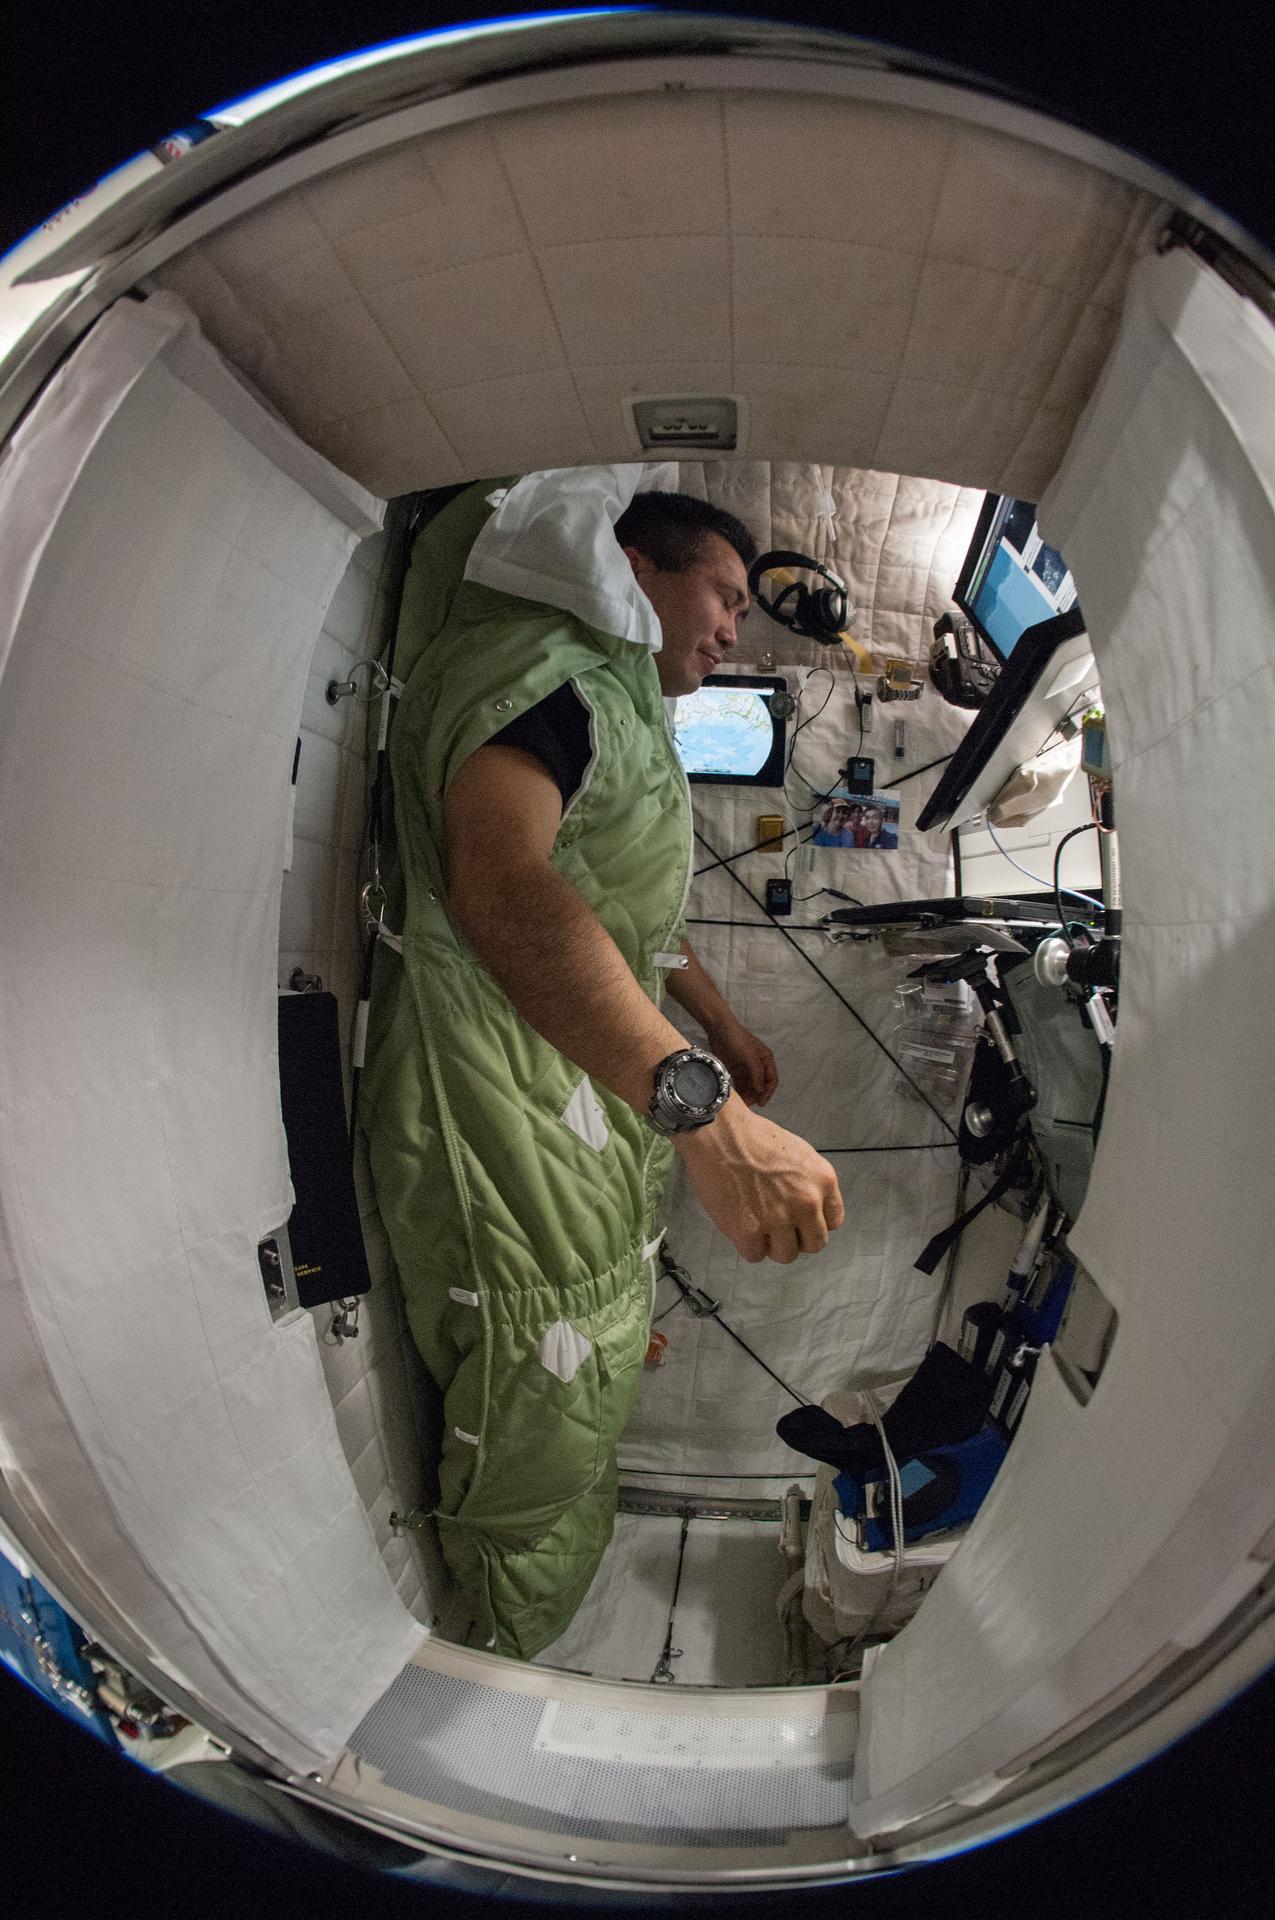 A man is inside the International Space Station. He appears to be upright, but is wearing a padded green sleeping bag that covers his entire body except his arms, which poke out through holes in the side. His eyes are closed.